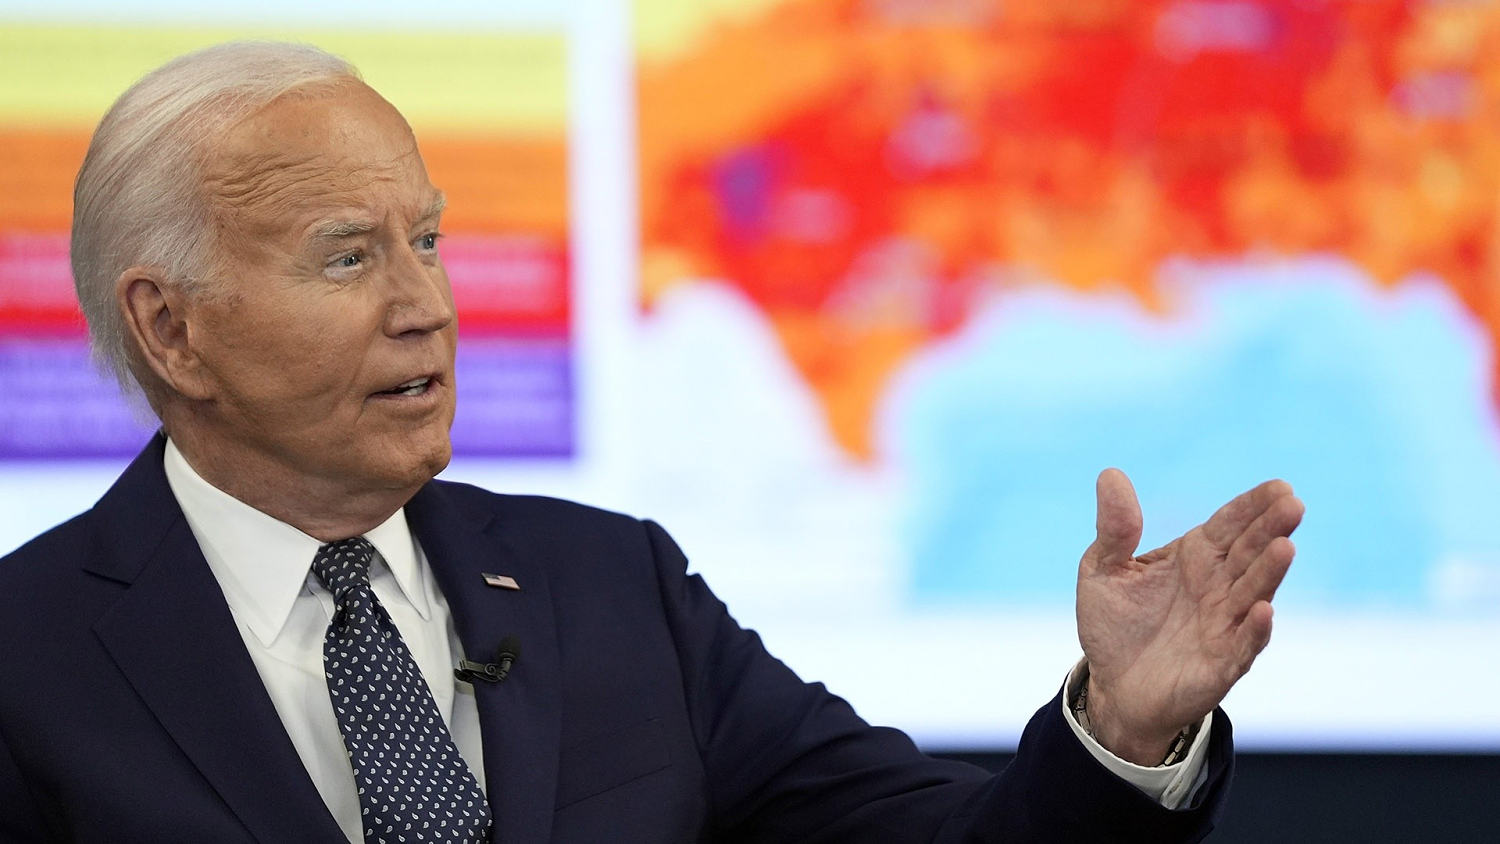 Biden outlines plans to address 'dangerous impacts of extreme weather'